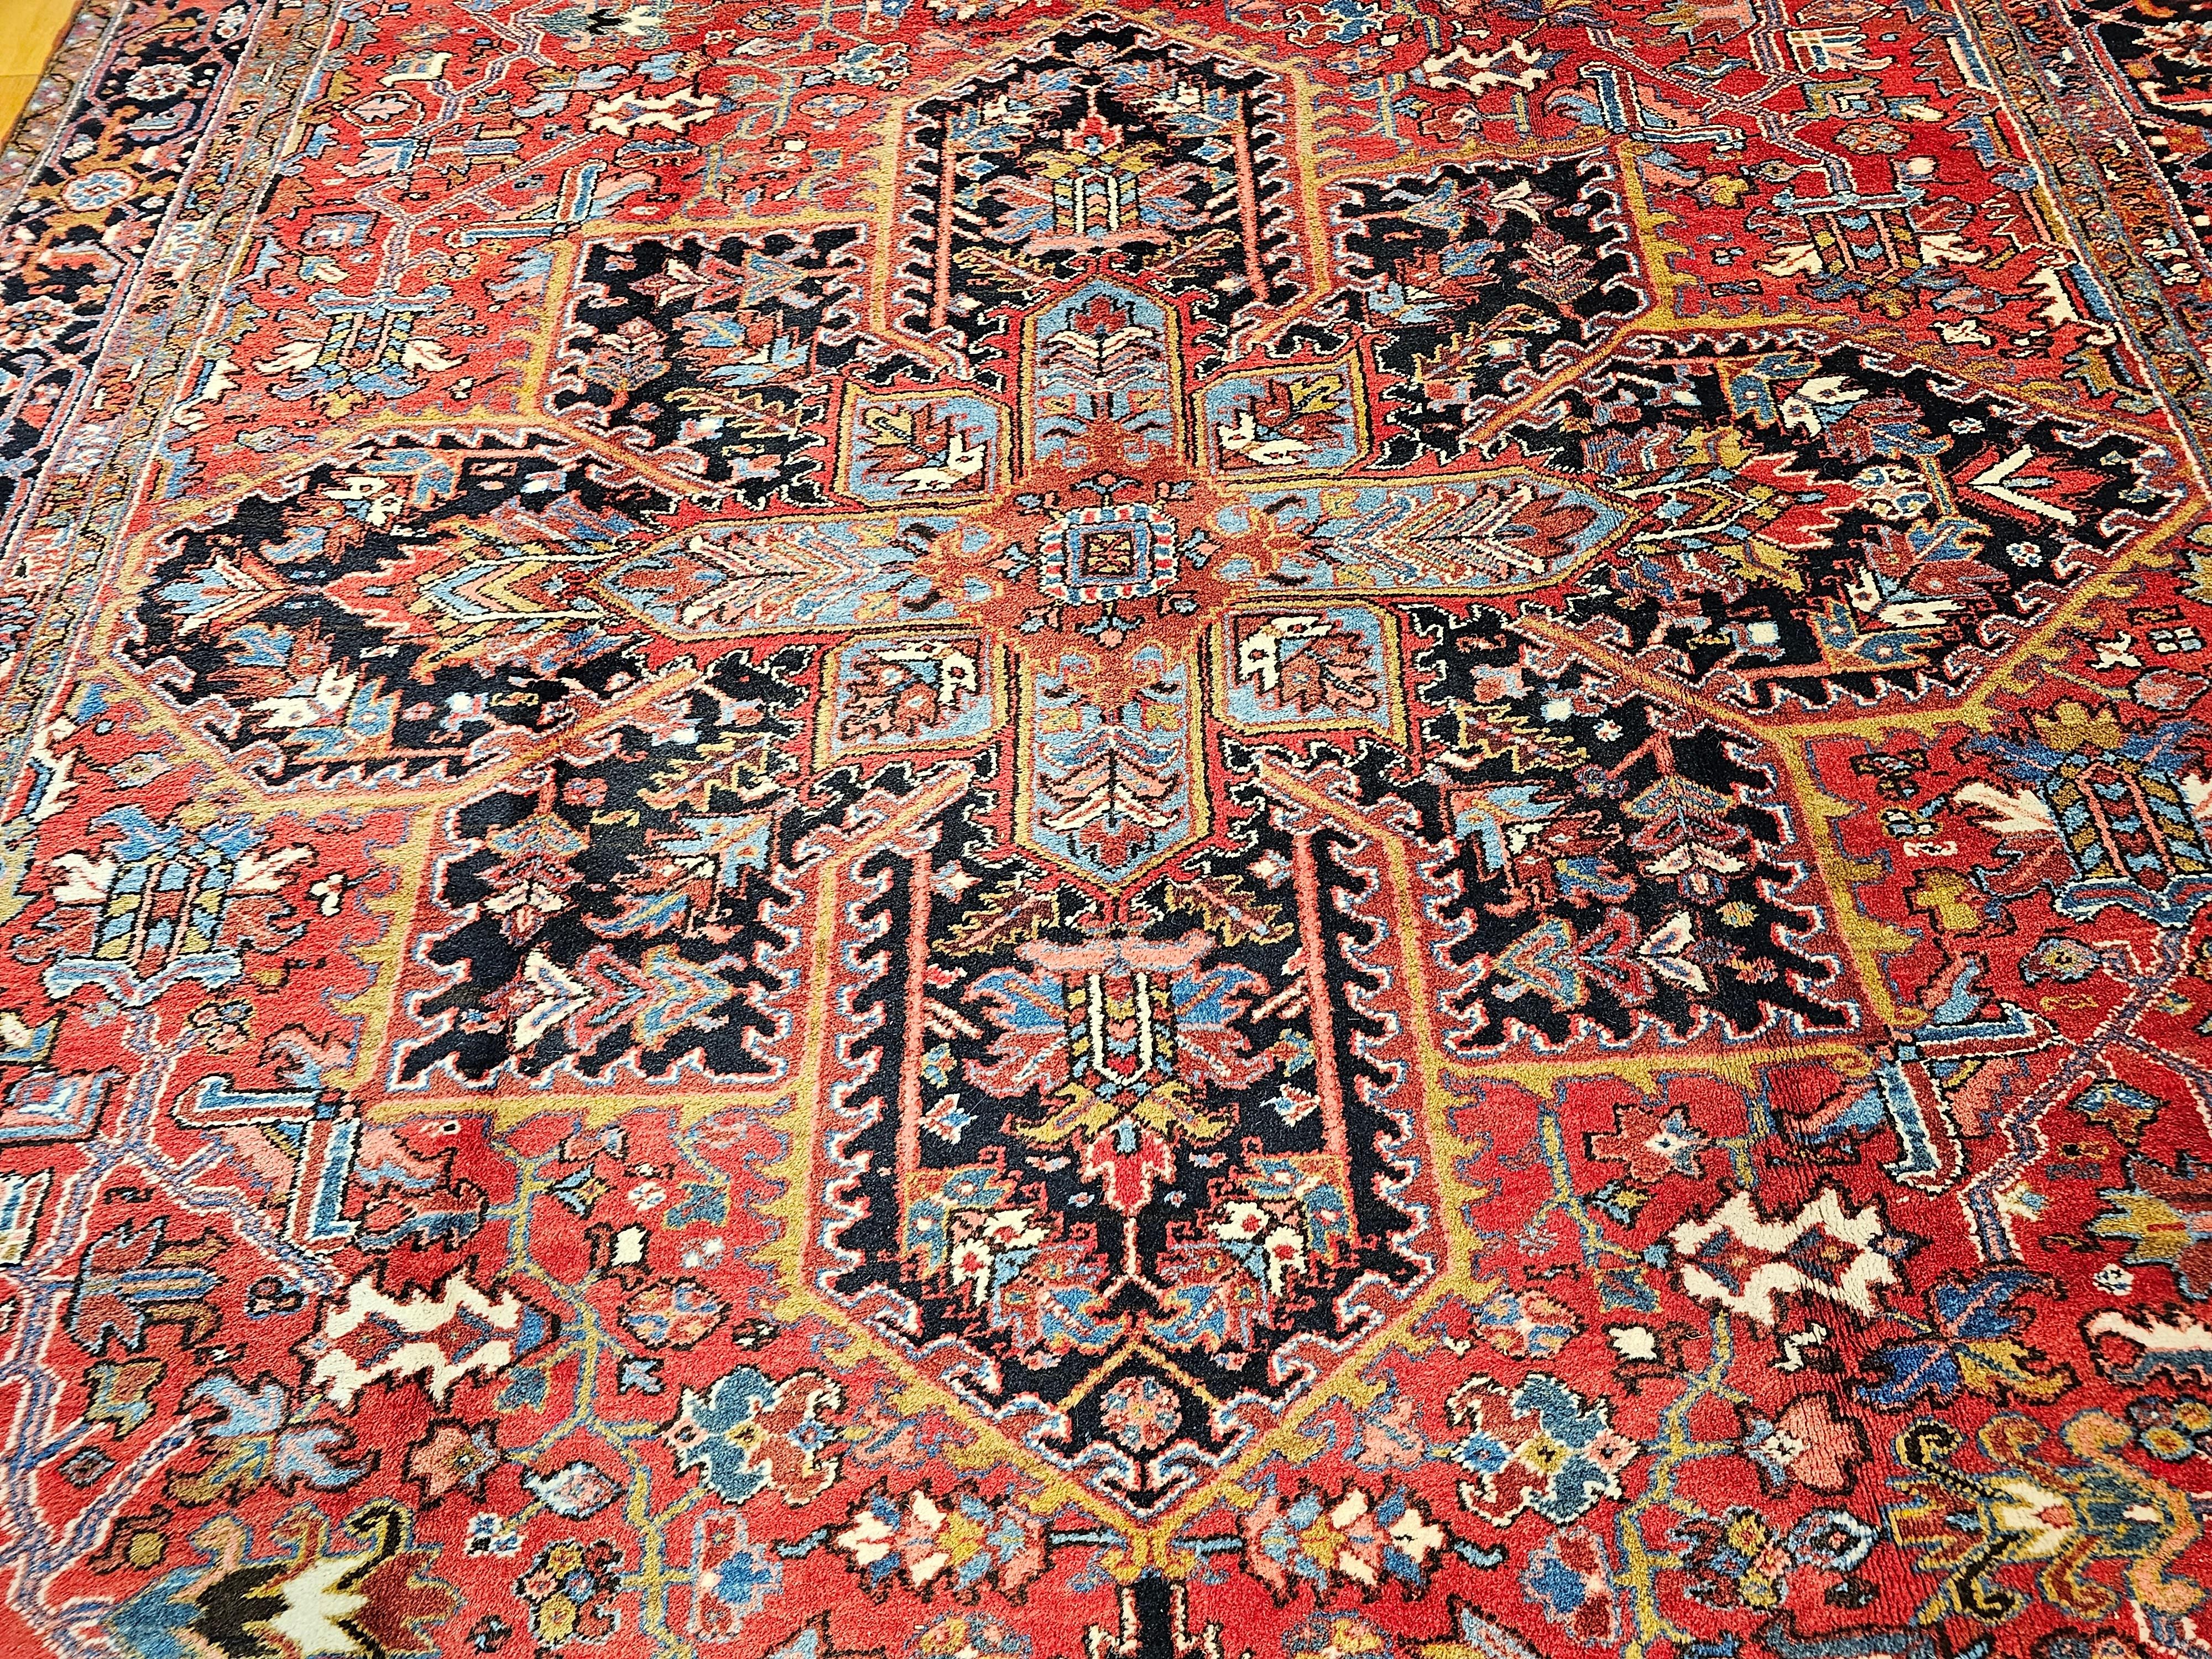 Vintage Oversize Persian Heriz Rug in Red, Navy, Ivory, Green, Blue, Brown In Good Condition For Sale In Barrington, IL